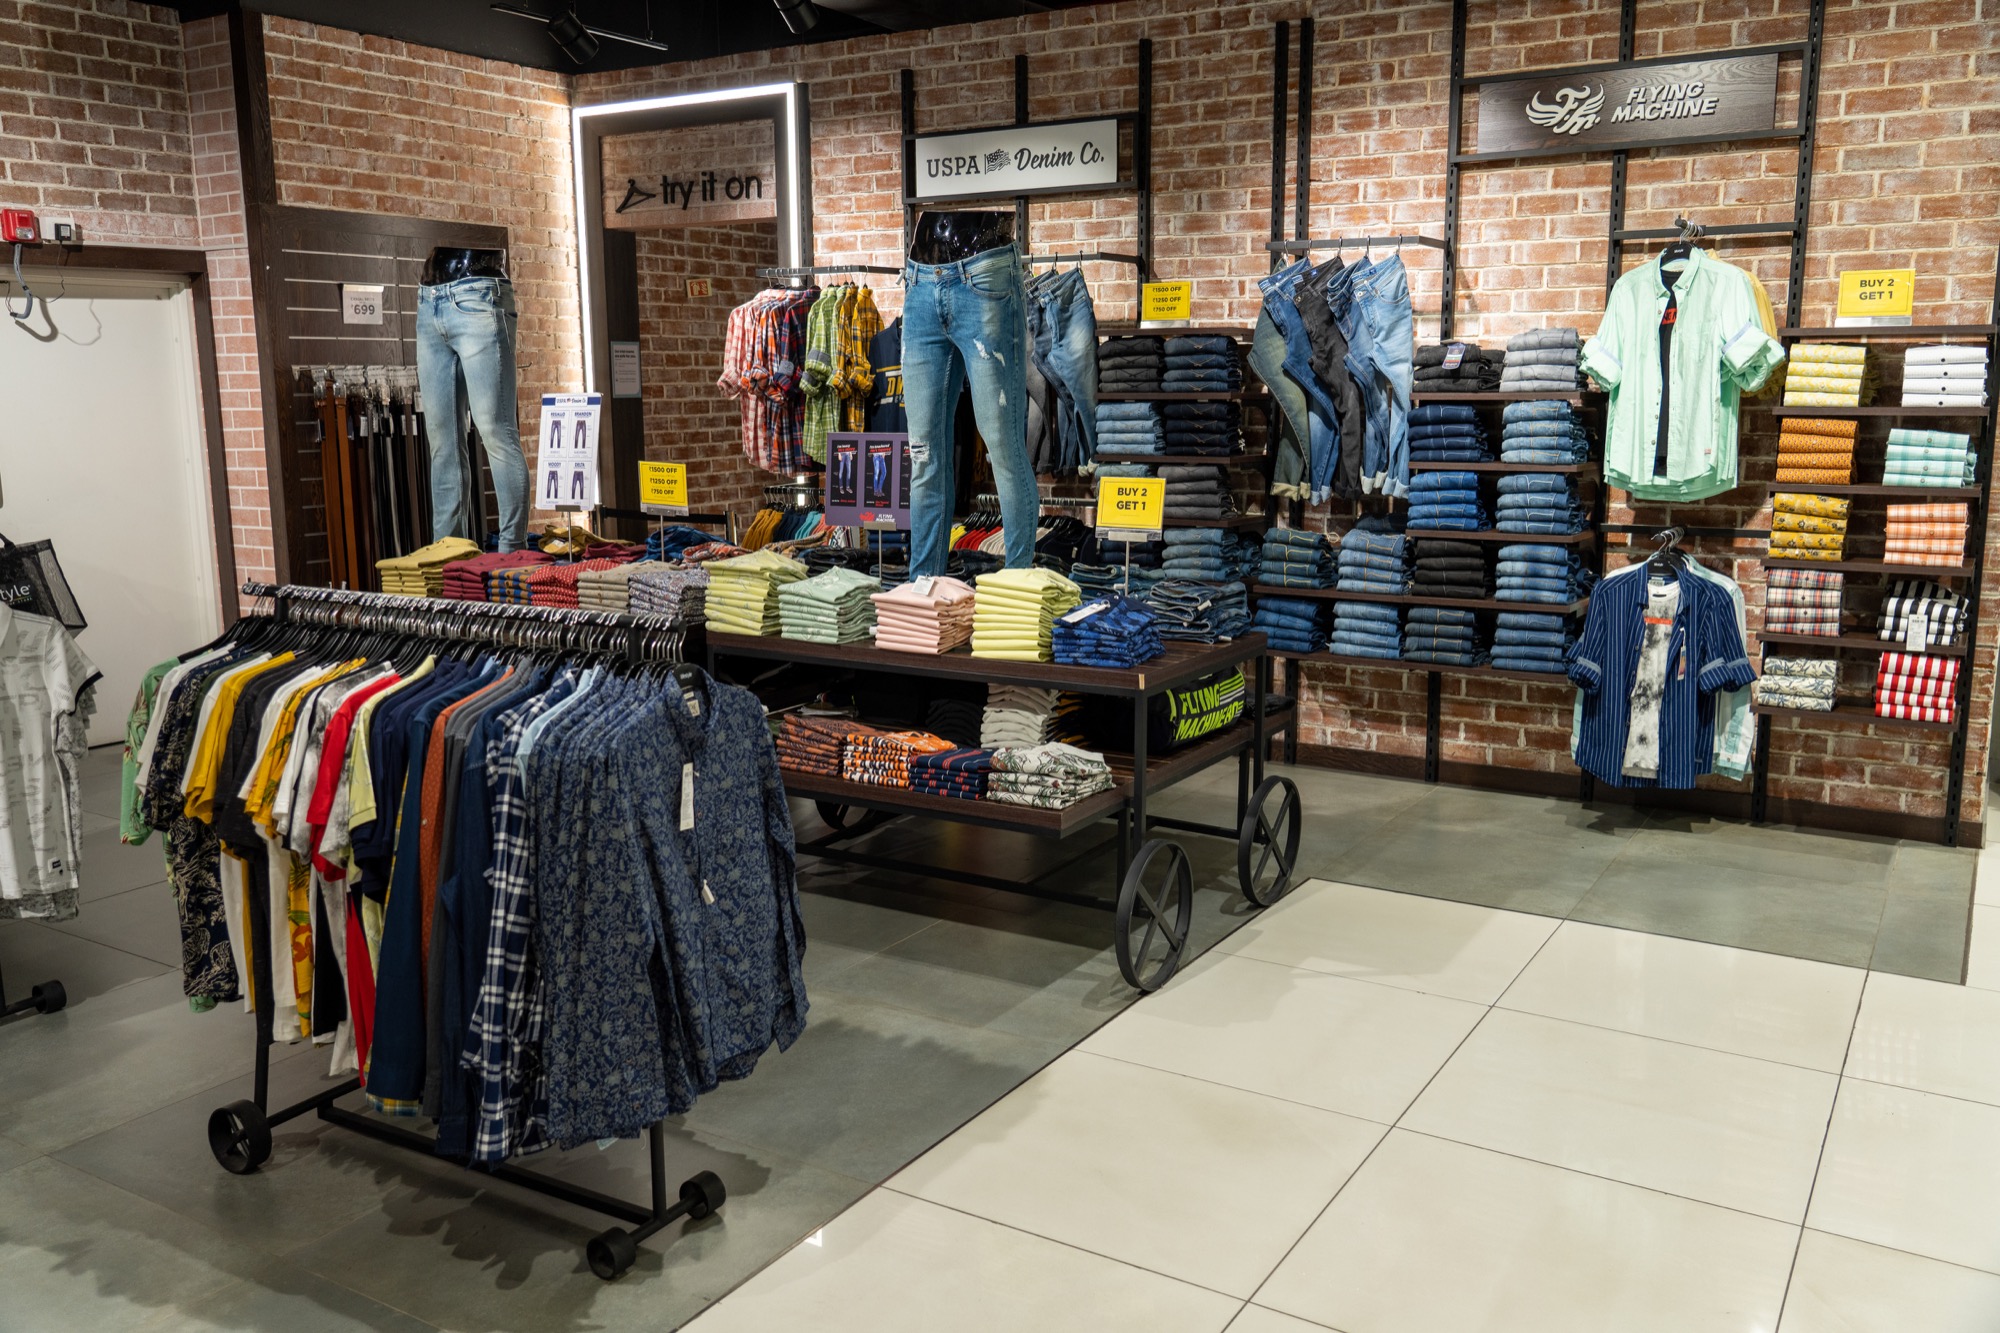 Reliance Trends At Next Musarambagh Mall